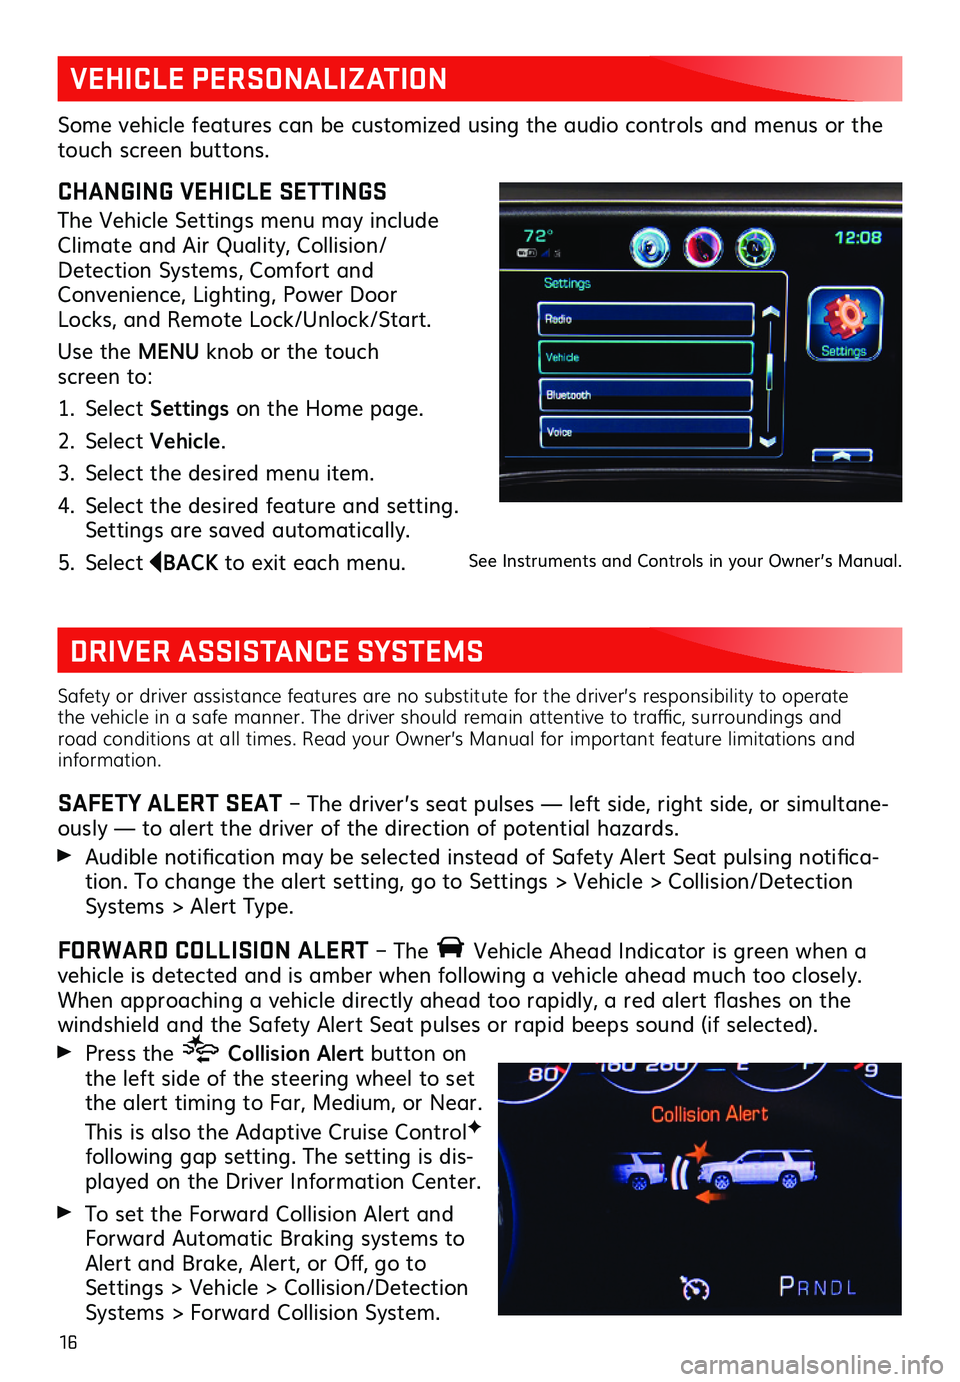 GMC YUKON XL 2019  Get To Know Guide 16
Safety or driver assistance features are no substitute for the driver’s responsibility to operate the vehicle in a safe manner. The driver should remain attentive to traffic, surroundings and roa